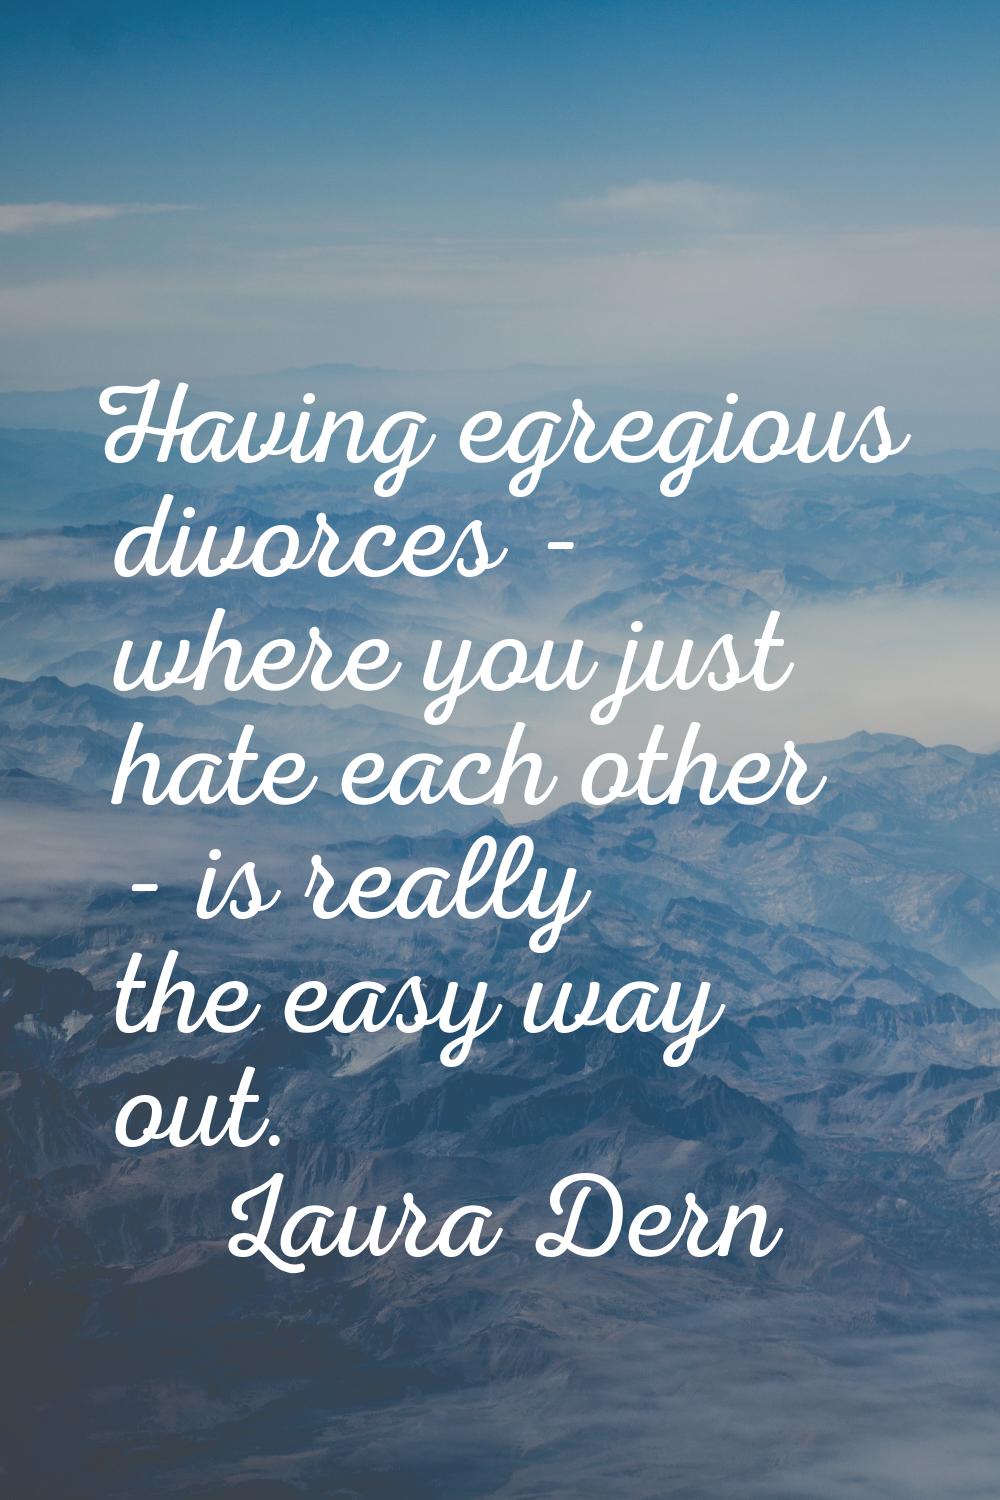 Having egregious divorces - where you just hate each other - is really the easy way out.